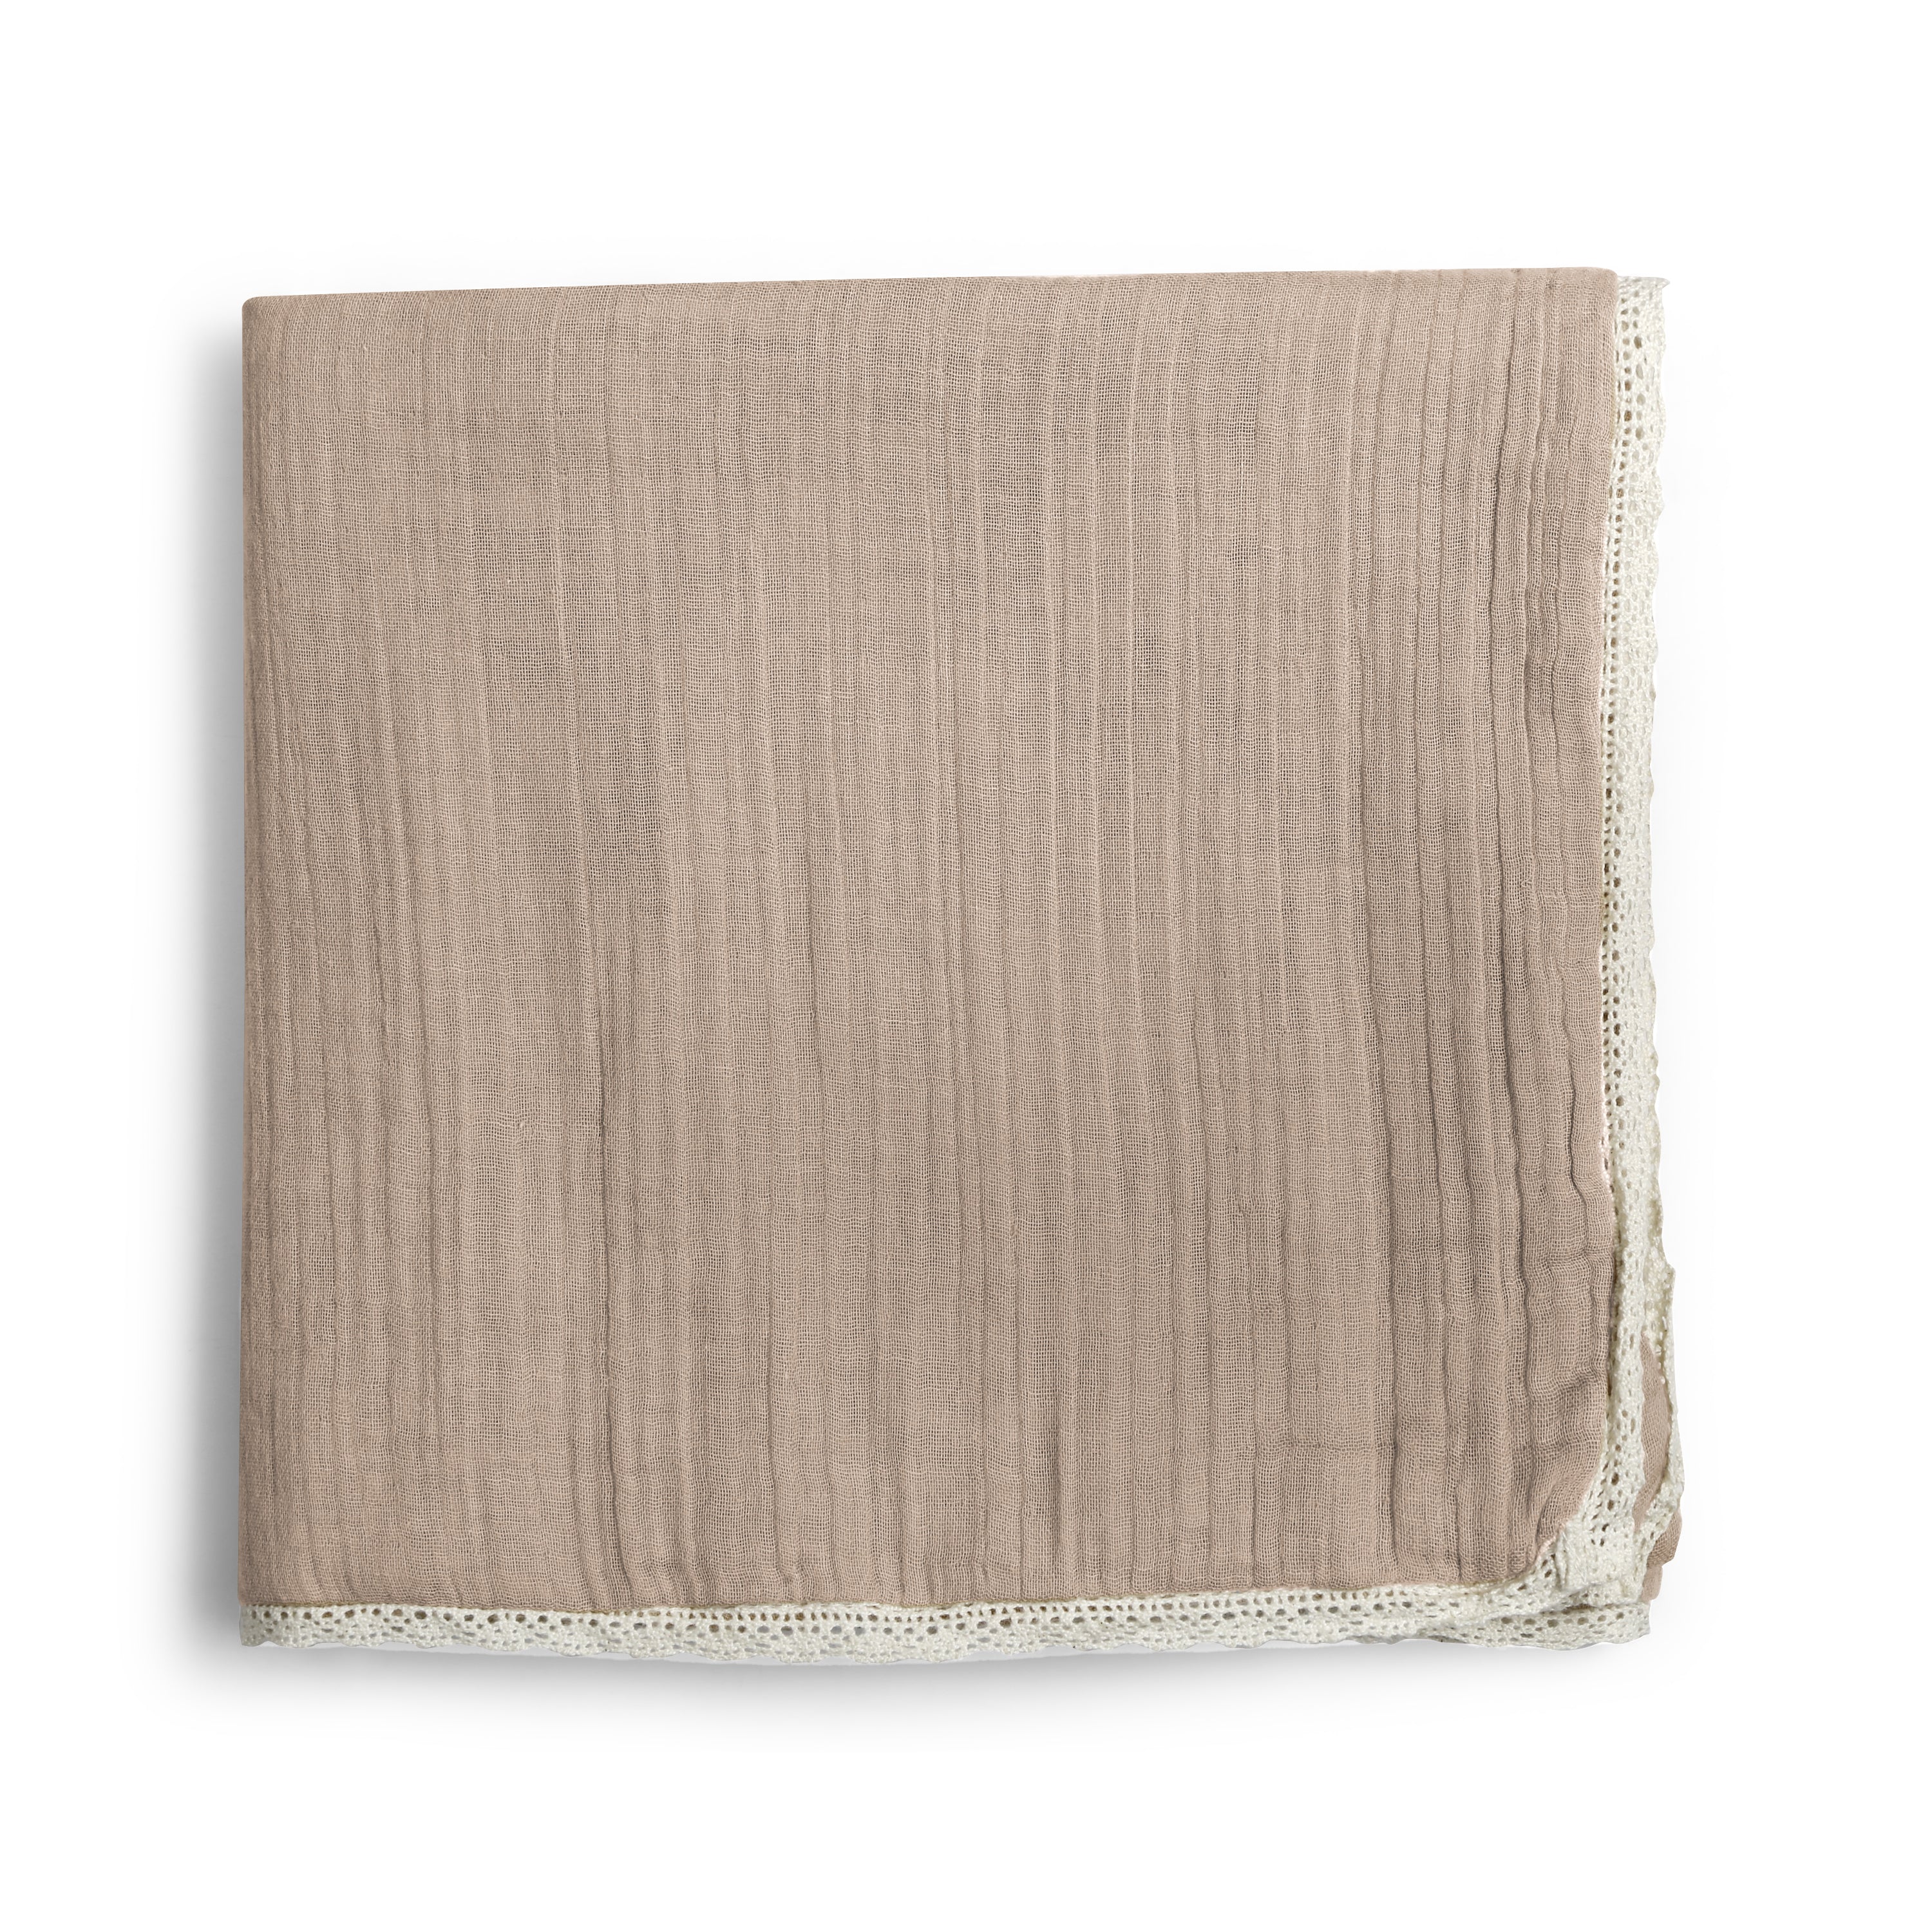 A taupe organic cotton muslin blanket with natural lace edges, neatly folded and placed on a white background. the fabric has a subtle striped texture by Makemake Organics.